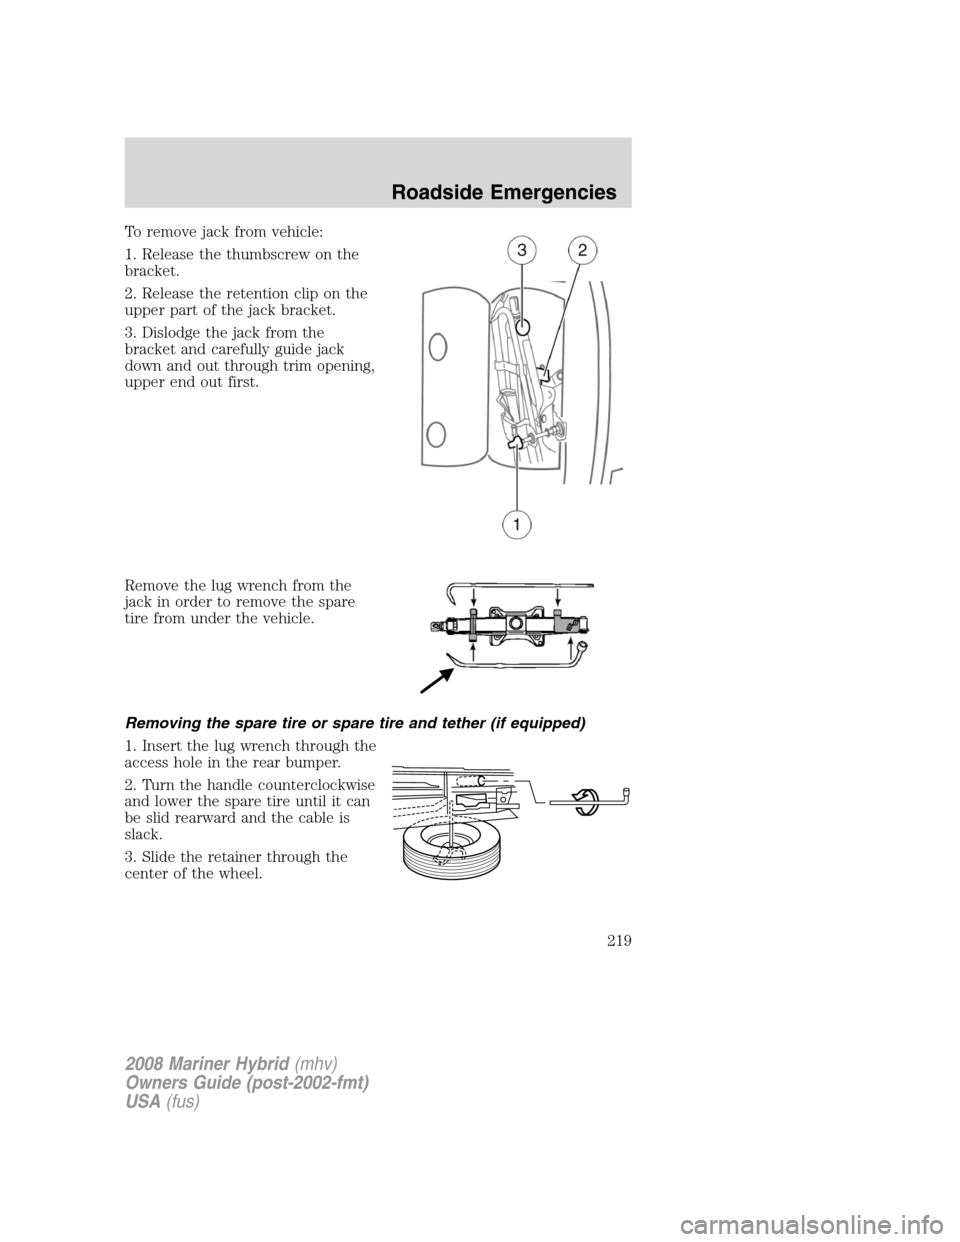 Mercury Mariner Hybrid 2008  Owners Manuals To remove jack from vehicle:
1. Release the thumbscrew on the
bracket.
2. Release the retention clip on the
upper part of the jack bracket.
3. Dislodge the jack from the
bracket and carefully guide ja